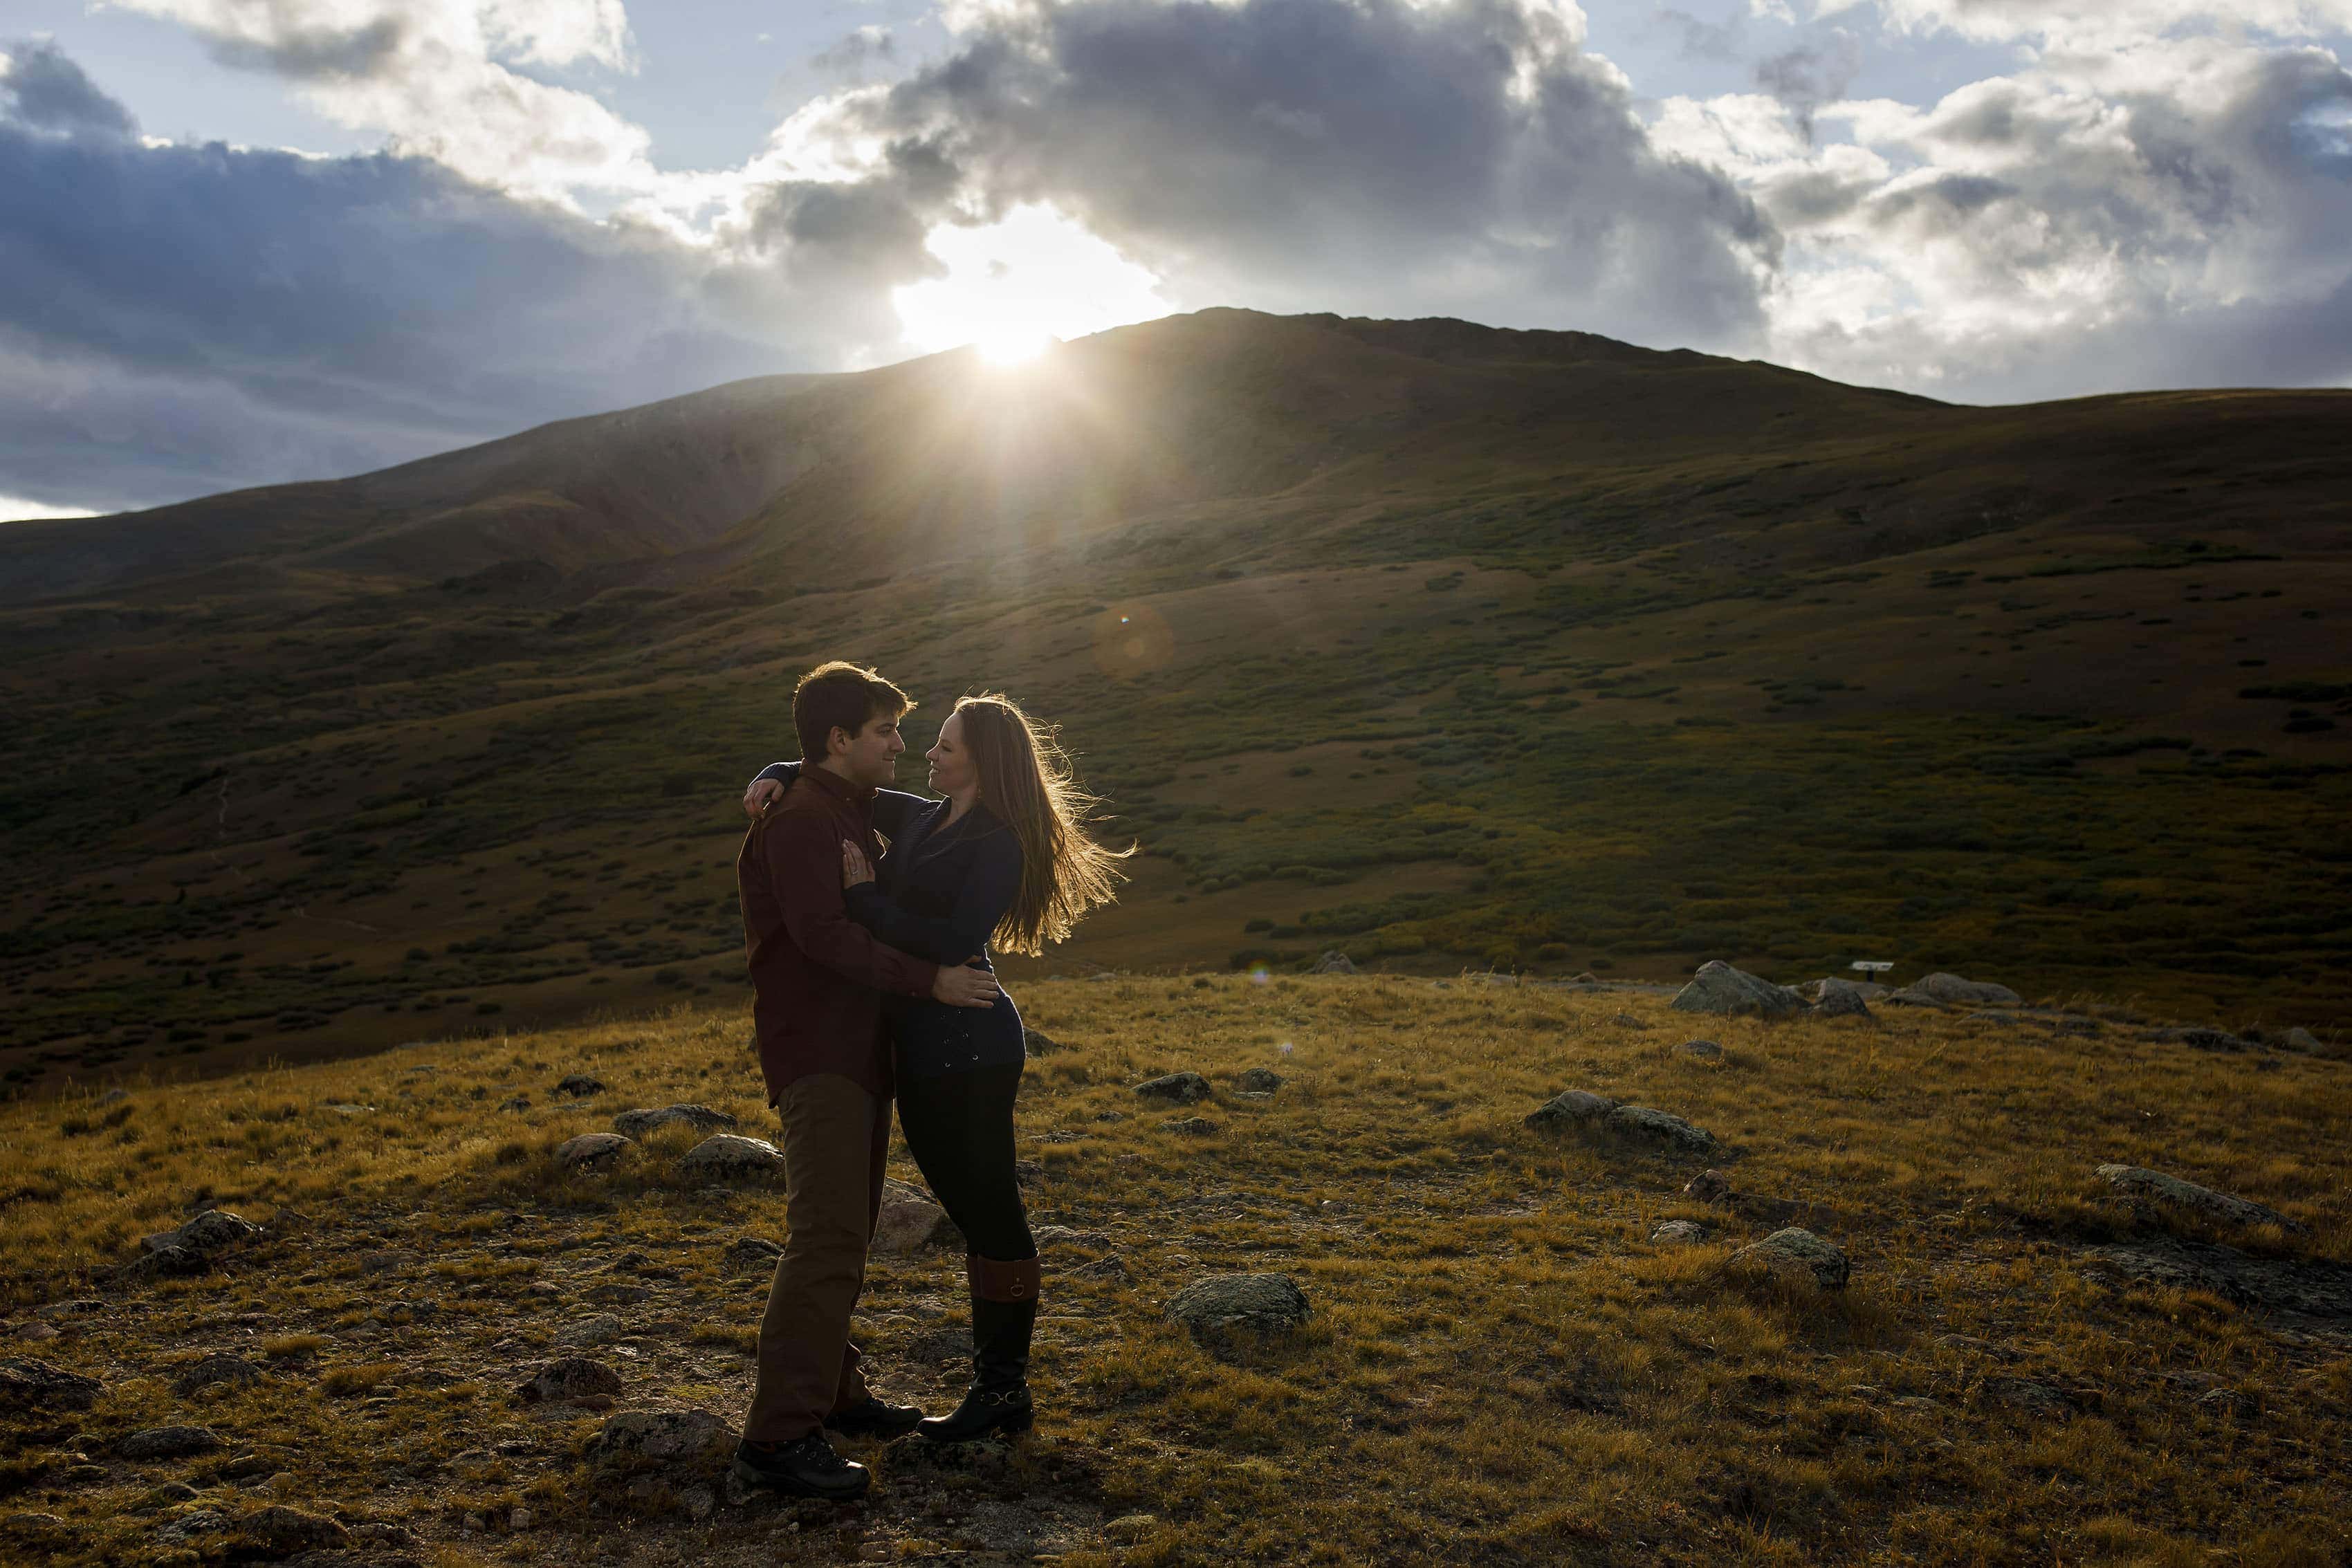 The sun sets over Square Top Mountain as a couple poses during their engagement photos at Guanella Pass